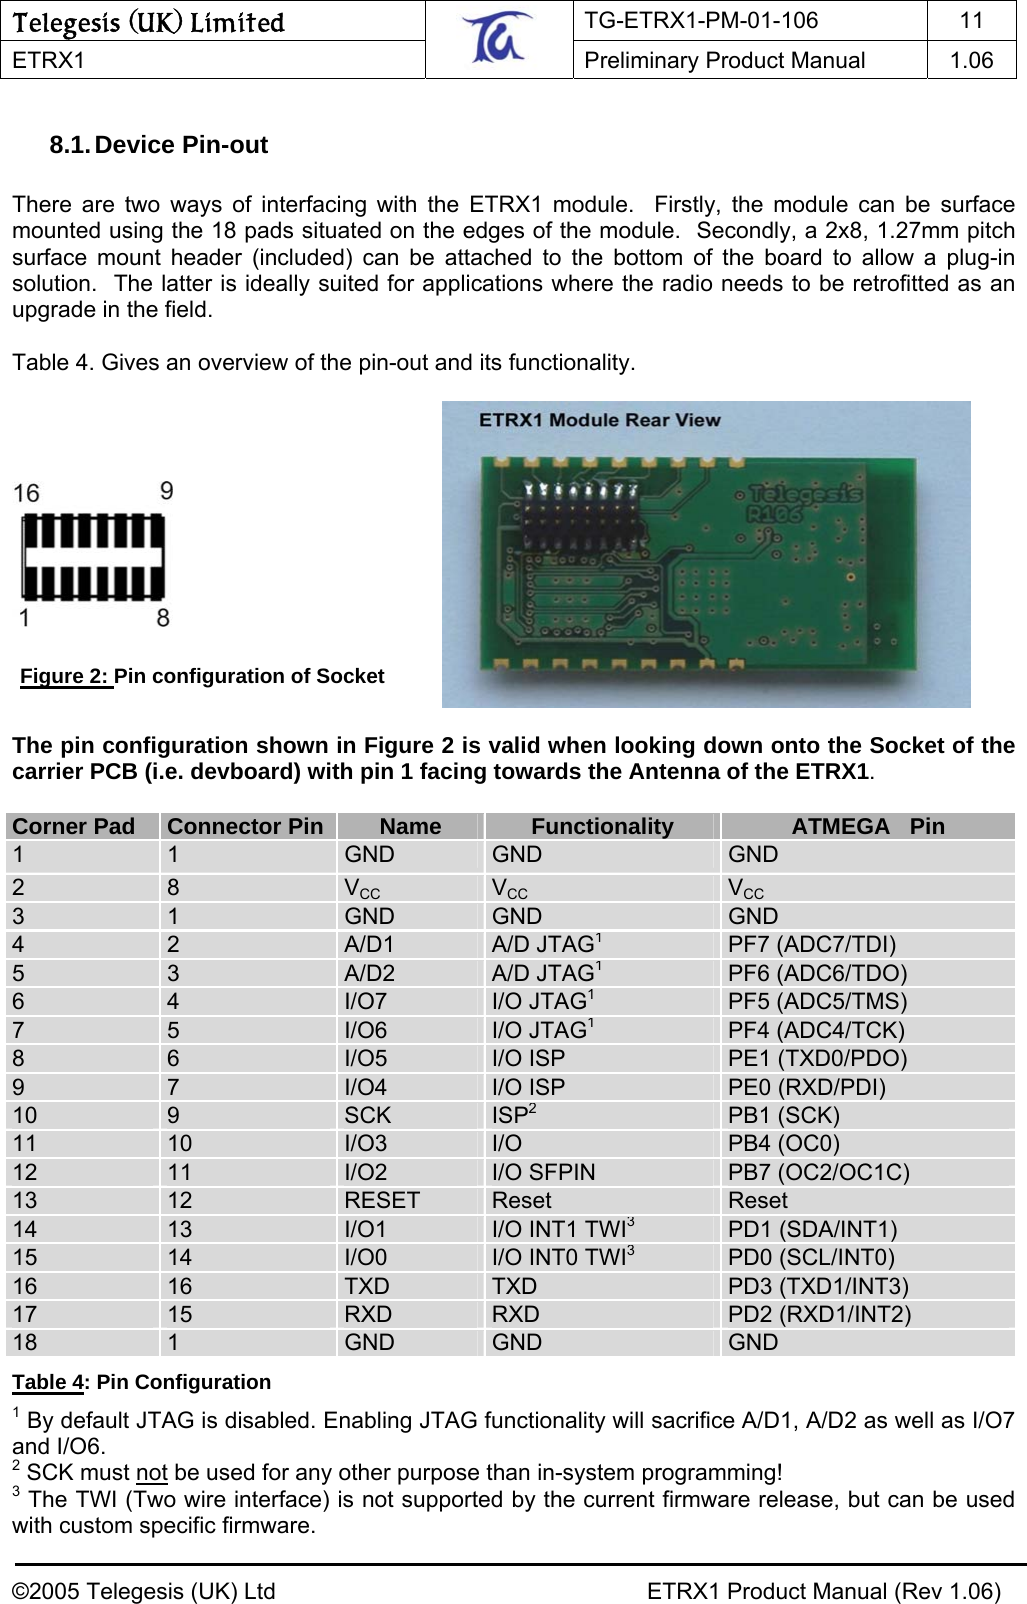 Telegesis (UK) Limited TG-ETRX1-PM-01-106 11  ETRX1    Preliminary Product Manual  1.06   8.1. Device  Pin-out  There are two ways of interfacing with the ETRX1 module.  Firstly, the module can be surface mounted using the 18 pads situated on the edges of the module.  Secondly, a 2x8, 1.27mm pitch surface mount header (included) can be attached to the bottom of the board to allow a plug-in solution.  The latter is ideally suited for applications where the radio needs to be retrofitted as an upgrade in the field.  Table 4. Gives an overview of the pin-out and its functionality.             Figure 2: Pin configuration of Socket  The pin configuration shown in Figure 2 is valid when looking down onto the Socket of the carrier PCB (i.e. devboard) with pin 1 facing towards the Antenna of the ETRX1.   Corner Pad  Connector Pin  Name  Functionality  ATMEGA   Pin 1  1  GND  GND  GND 2  8  VCC VCC VCC3  1  GND  GND  GND 4  2  A/D1  A/D JTAG1PF7 (ADC7/TDI) 5  3  A/D2  A/D JTAG1PF6 (ADC6/TDO) 6  4  I/O7  I/O JTAG1PF5 (ADC5/TMS) 7  5  I/O6  I/O JTAG1PF4 (ADC4/TCK) 8  6  I/O5  I/O ISP  PE1 (TXD0/PDO) 9  7  I/O4  I/O ISP  PE0 (RXD/PDI) 10  9  SCK  ISP2PB1 (SCK) 11  10  I/O3  I/O  PB4 (OC0) 12  11  I/O2  I/O SFPIN  PB7 (OC2/OC1C) 13  12  RESET  Reset  Reset 14  13  I/O1  I/O INT1 TWI3PD1 (SDA/INT1) 15  14  I/O0  I/O INT0 TWI3PD0 (SCL/INT0) 16  16  TXD  TXD  PD3 (TXD1/INT3) 17  15  RXD  RXD  PD2 (RXD1/INT2) 18  1  GND  GND  GND Table 4: Pin Configuration 1 By default JTAG is disabled. Enabling JTAG functionality will sacrifice A/D1, A/D2 as well as I/O7 and I/O6. 2 SCK must not be used for any other purpose than in-system programming! 3 The TWI (Two wire interface) is not supported by the current firmware release, but can be used with custom specific firmware. ©2005 Telegesis (UK) Ltd    ETRX1 Product Manual (Rev 1.06) 